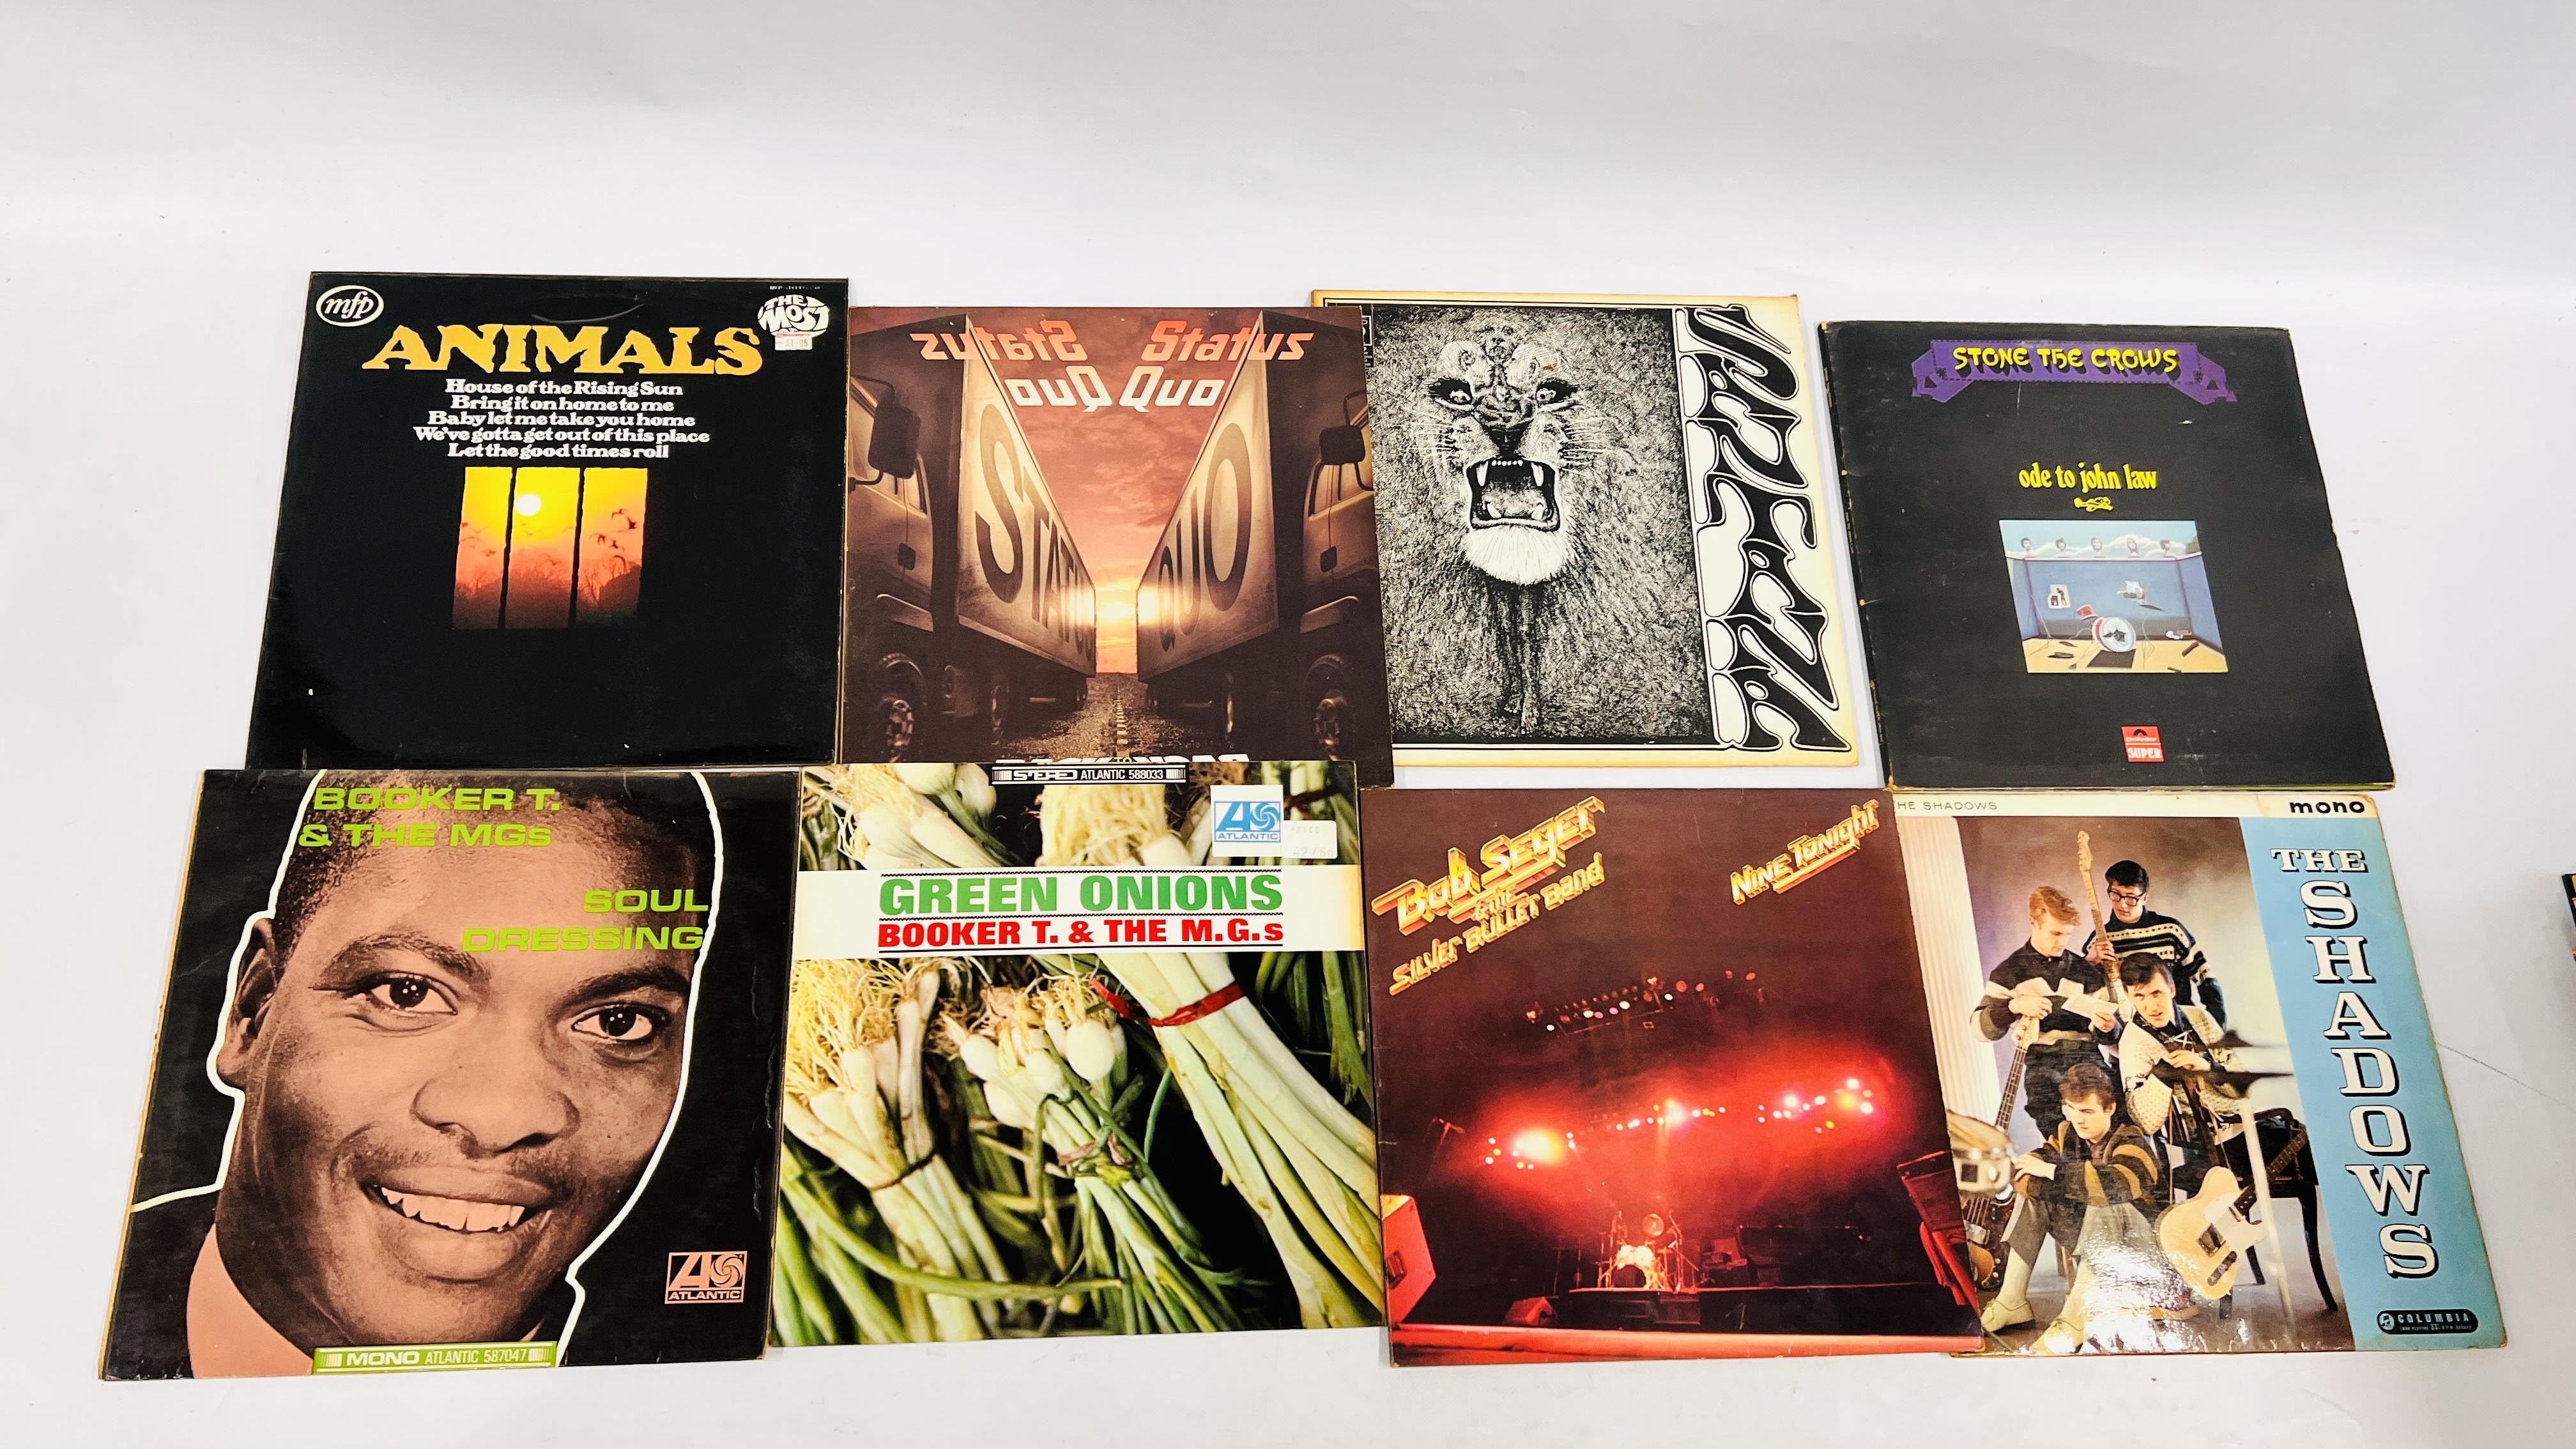 2 BOXES CONTAINING AN EXTENSIVE COLLECTION OF MAINLY 70'S AND 80'S ROCK MUSIC TO INCLUDE ROLLING - Image 14 of 20